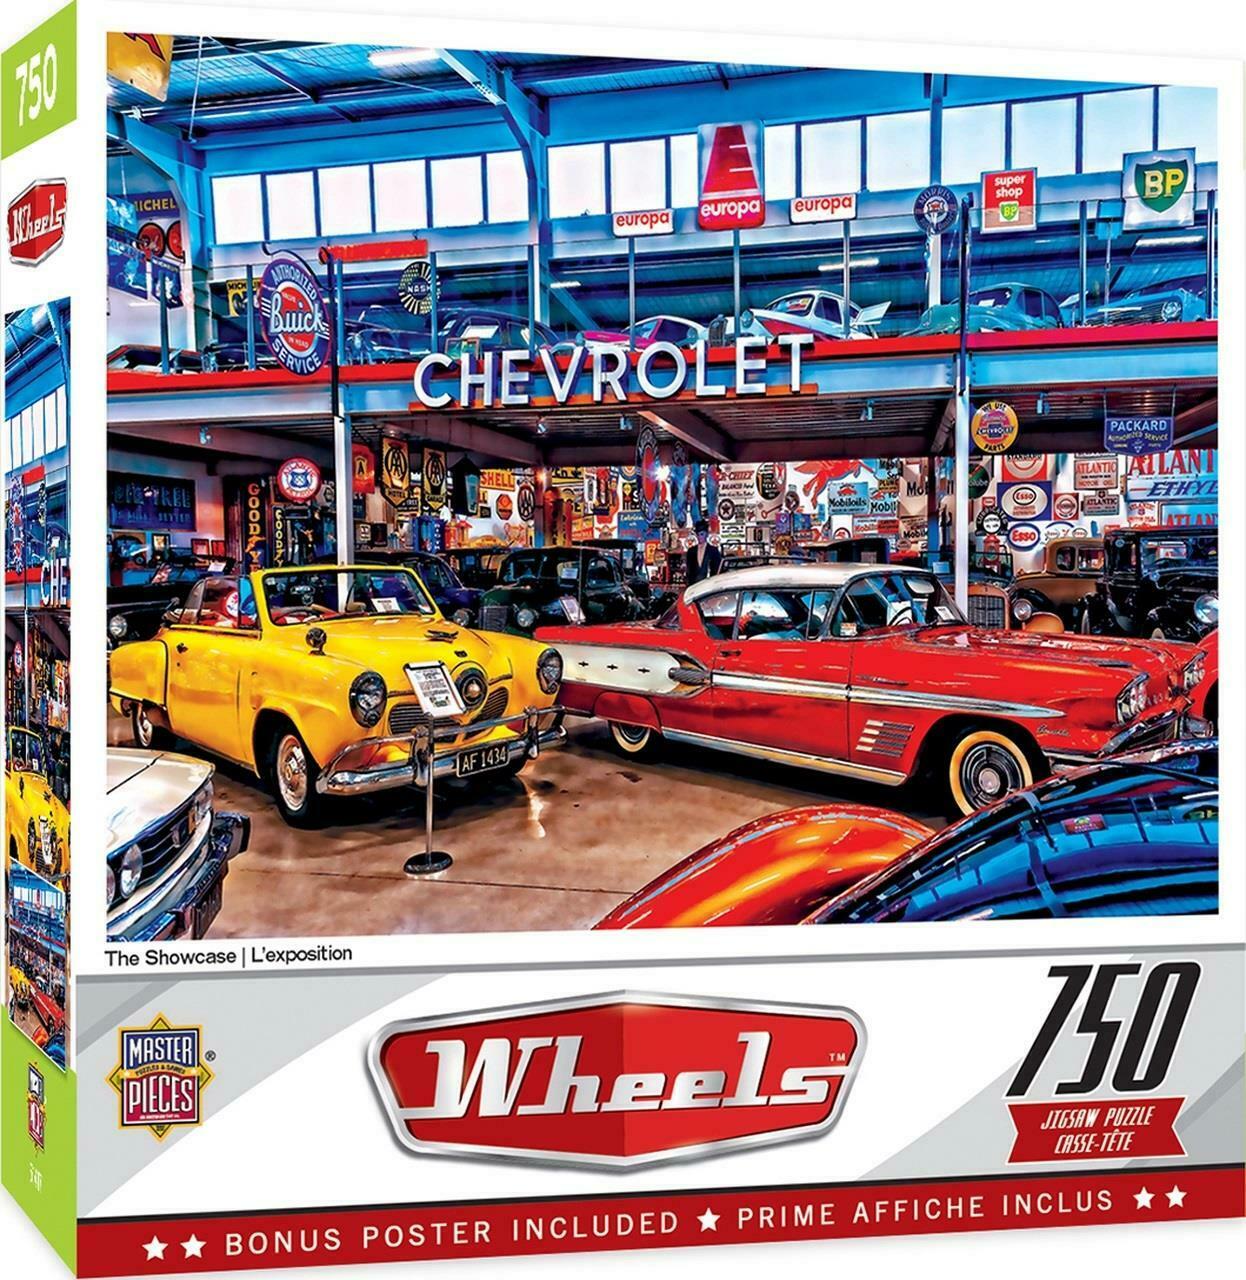 New Masterpieces Wheels - The Showcase - 750 Piece Jigsaw Puzzle, 32070